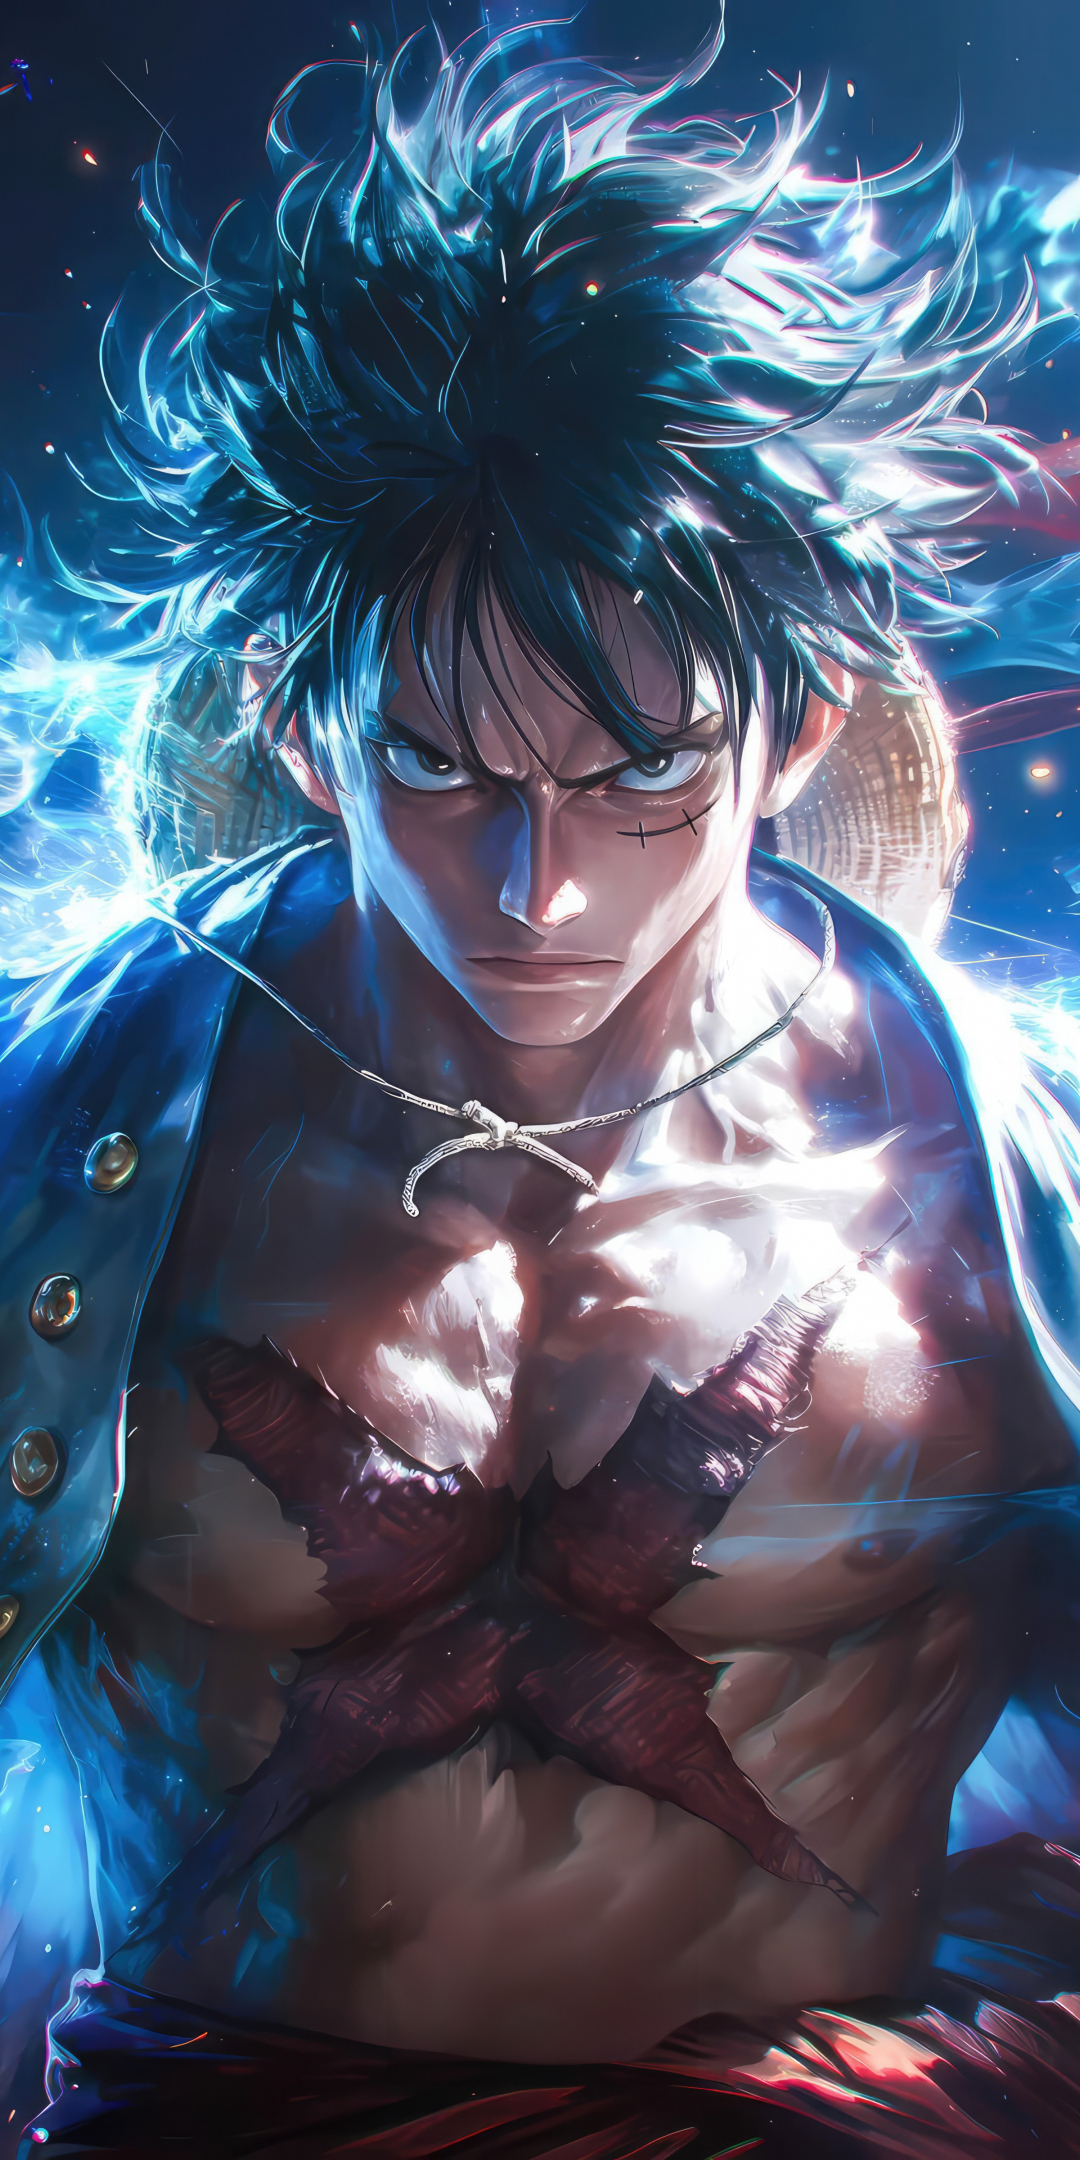 Angry Monkey D. Luffy, legacy pirate anime, art, 1080x2160 wallpaper